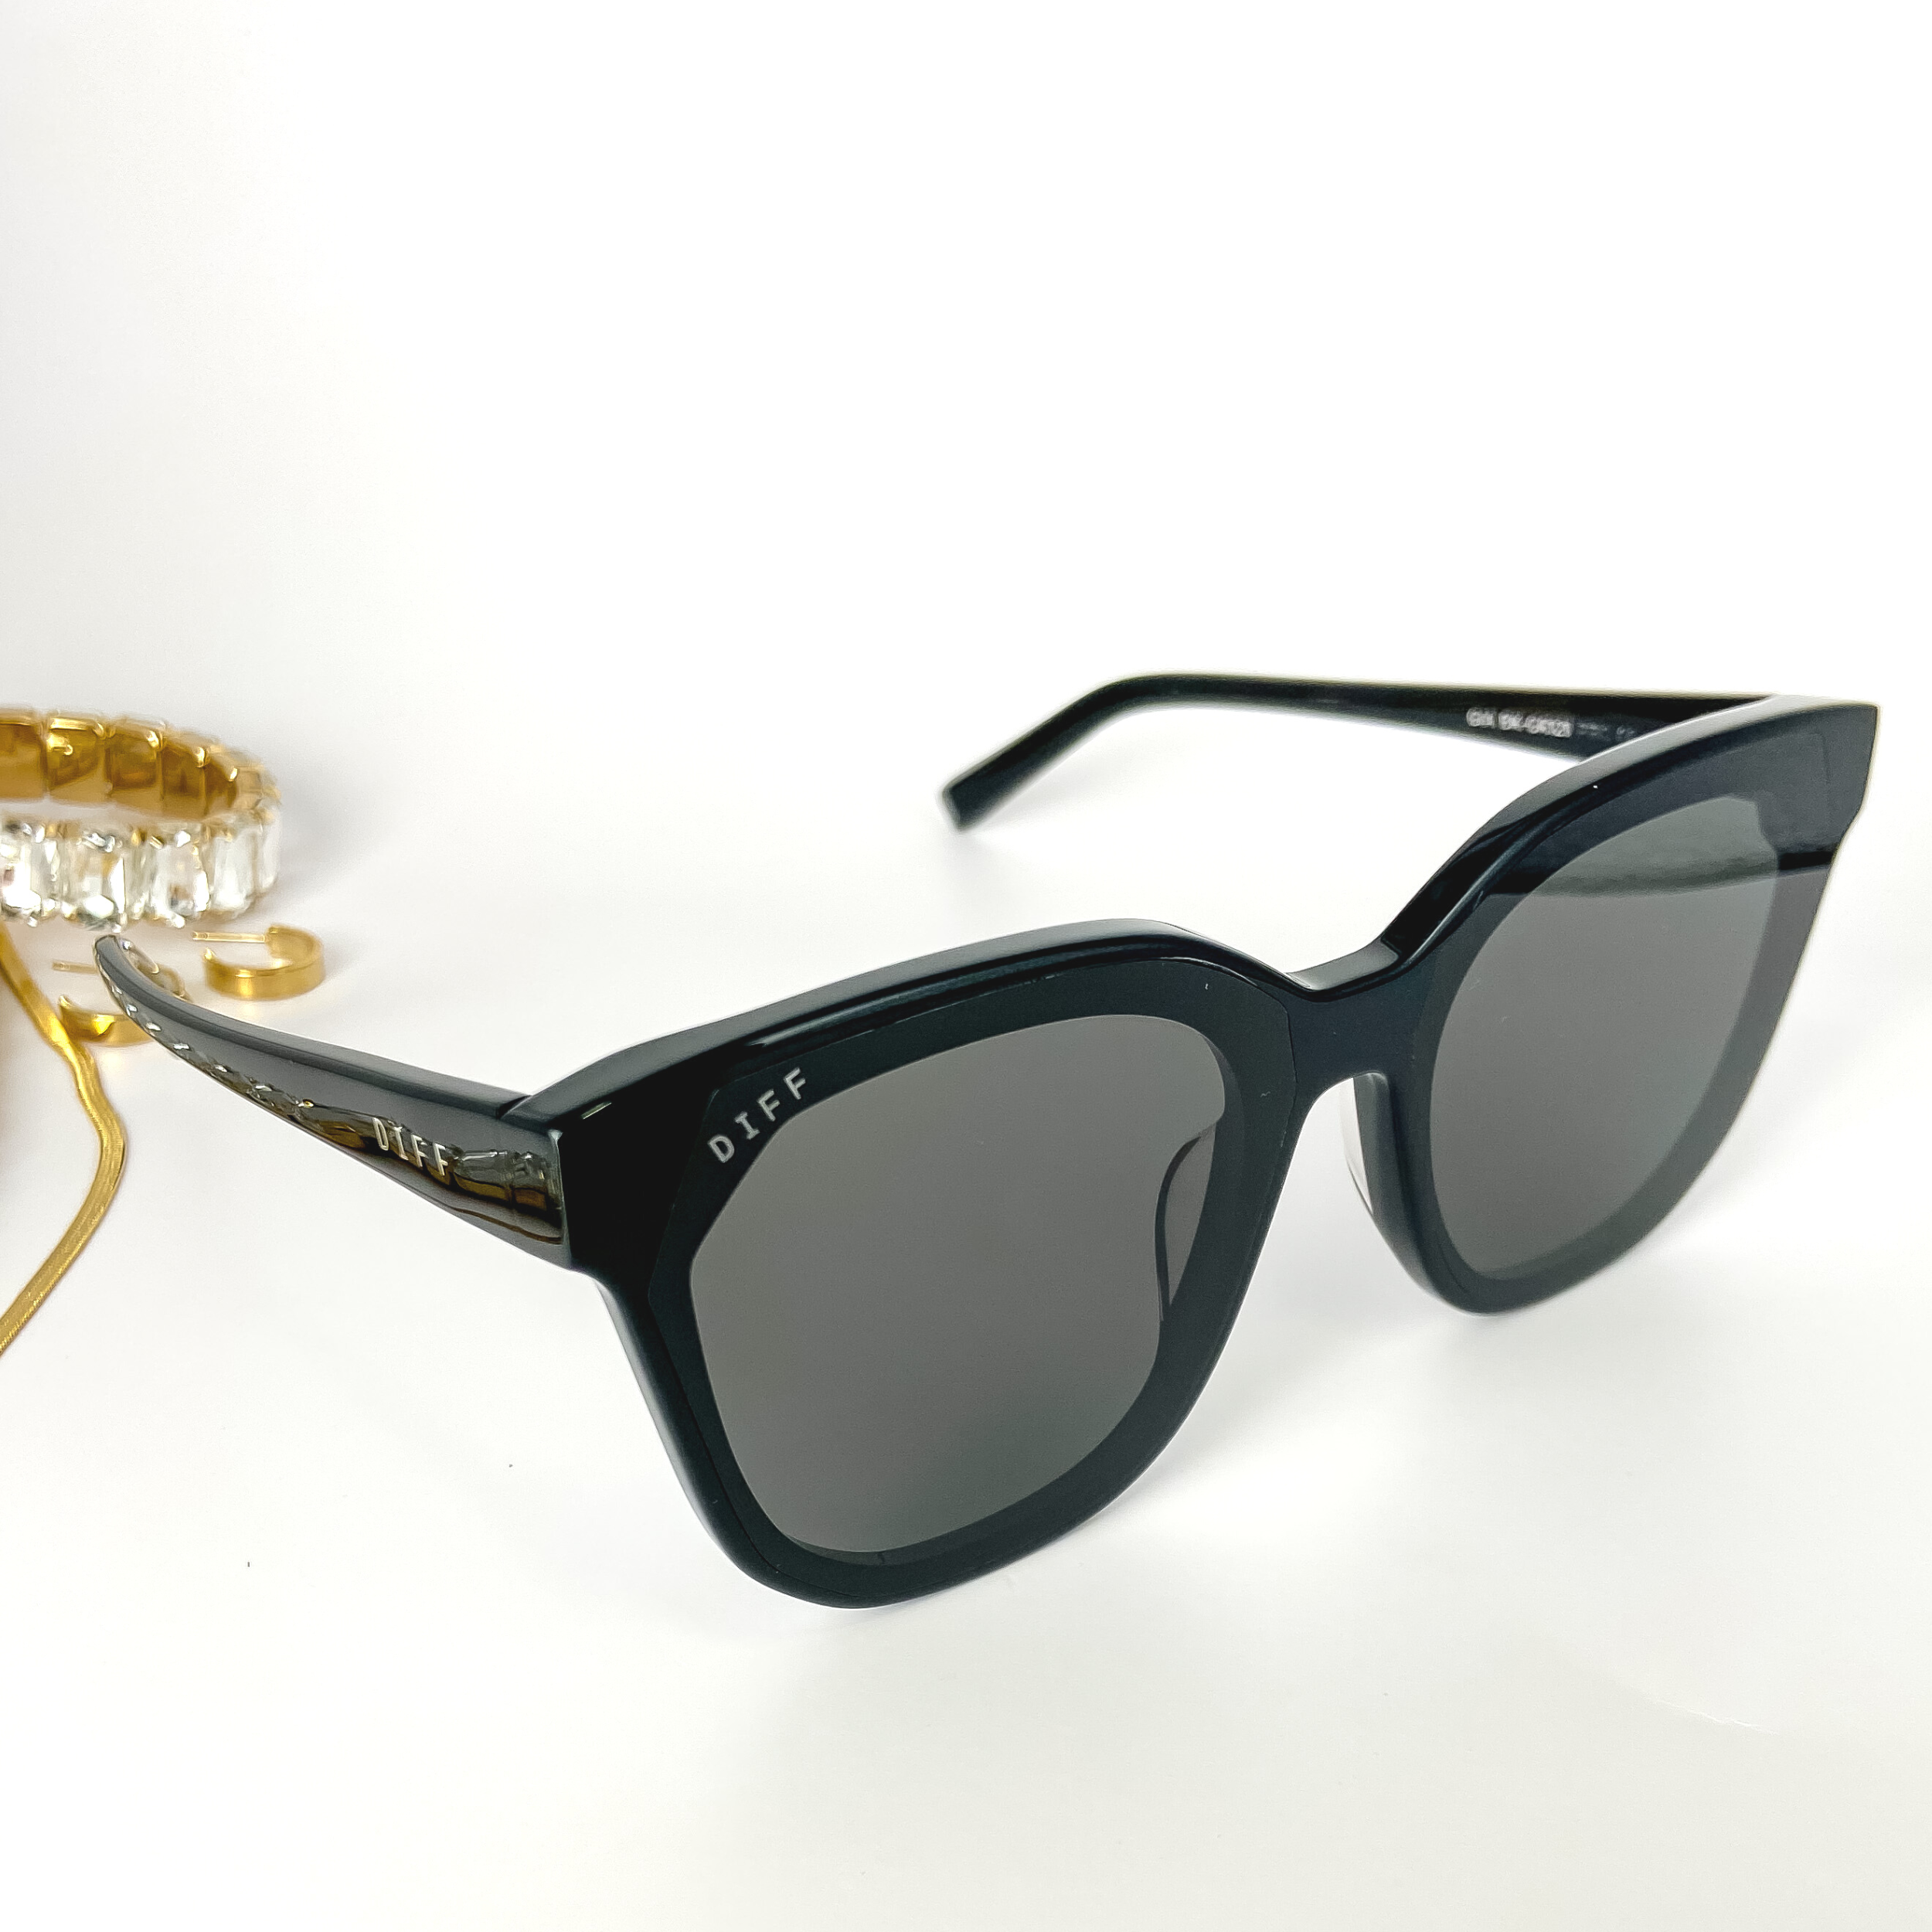 A pair of black cat-eye sunglasses with black lenses. These sunglasses are pictured on a white background with gold jewelry.